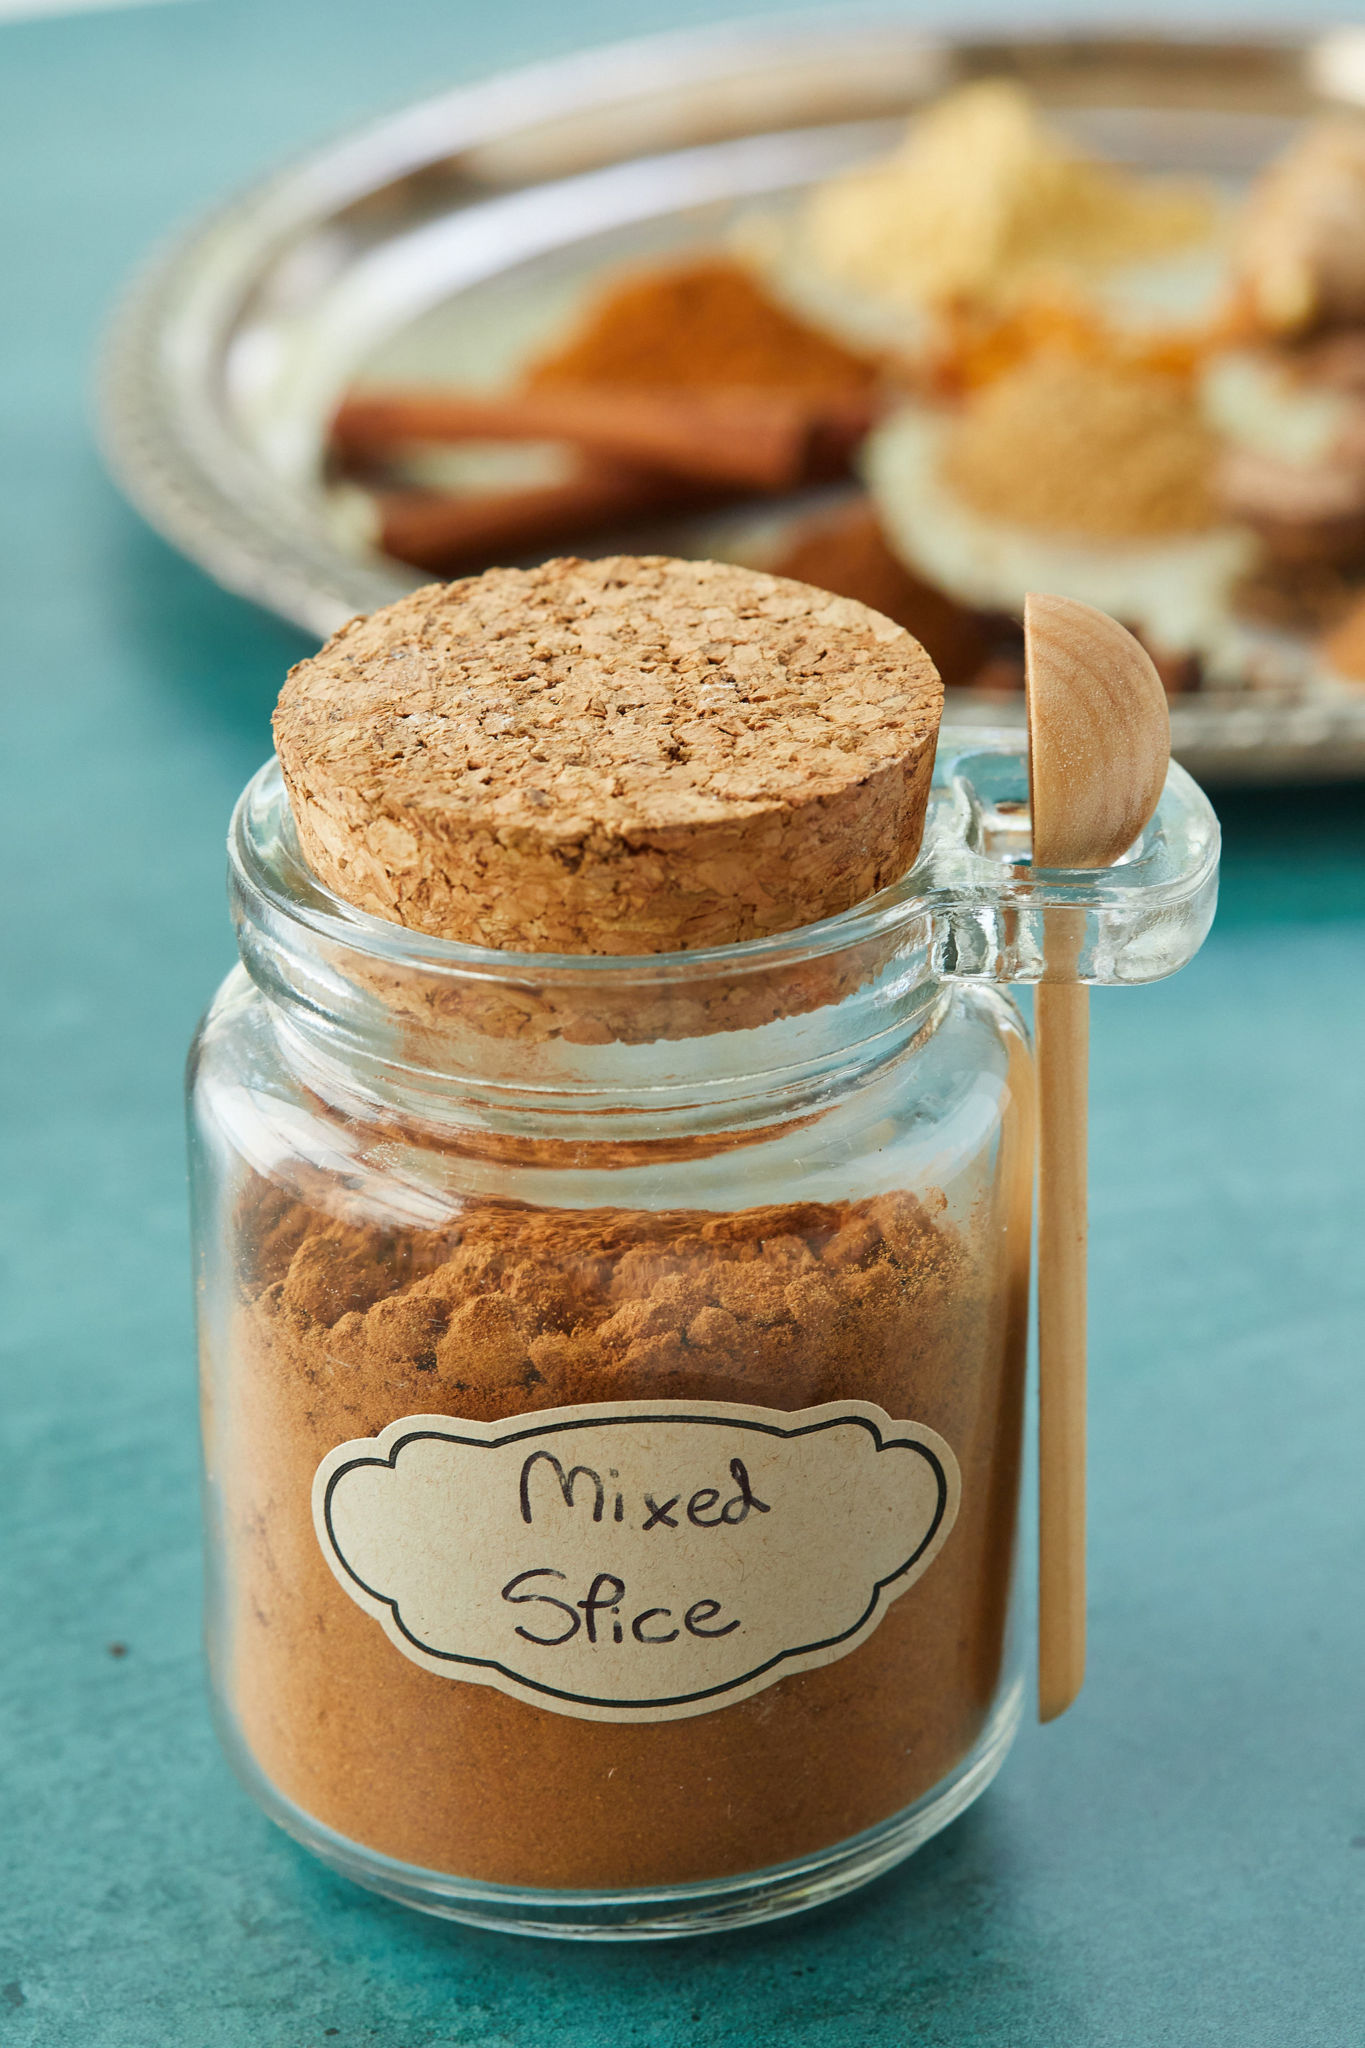 A jar of homemade mixed spice, with a wooden spoon for serving.